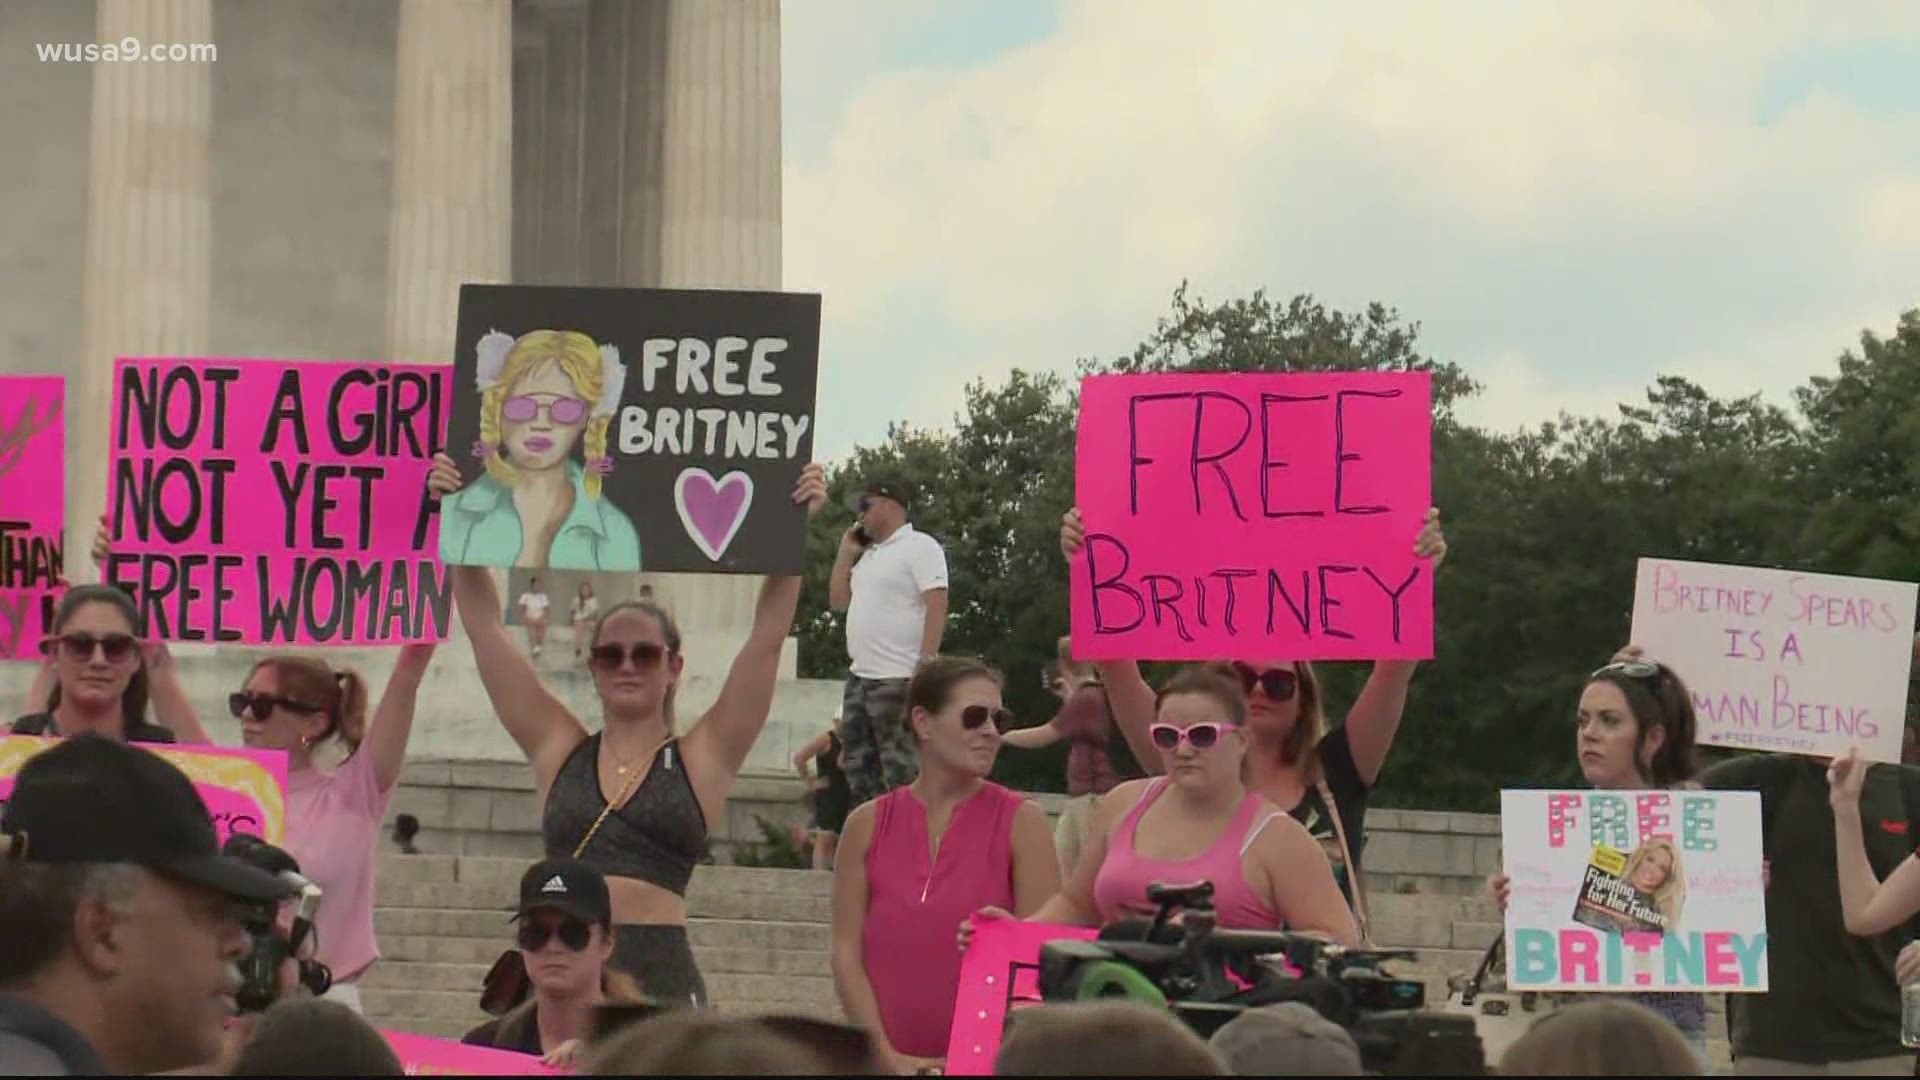 The group, Free Britney America, rallied on the day Britney Spears’ conservatorship case returns to court.